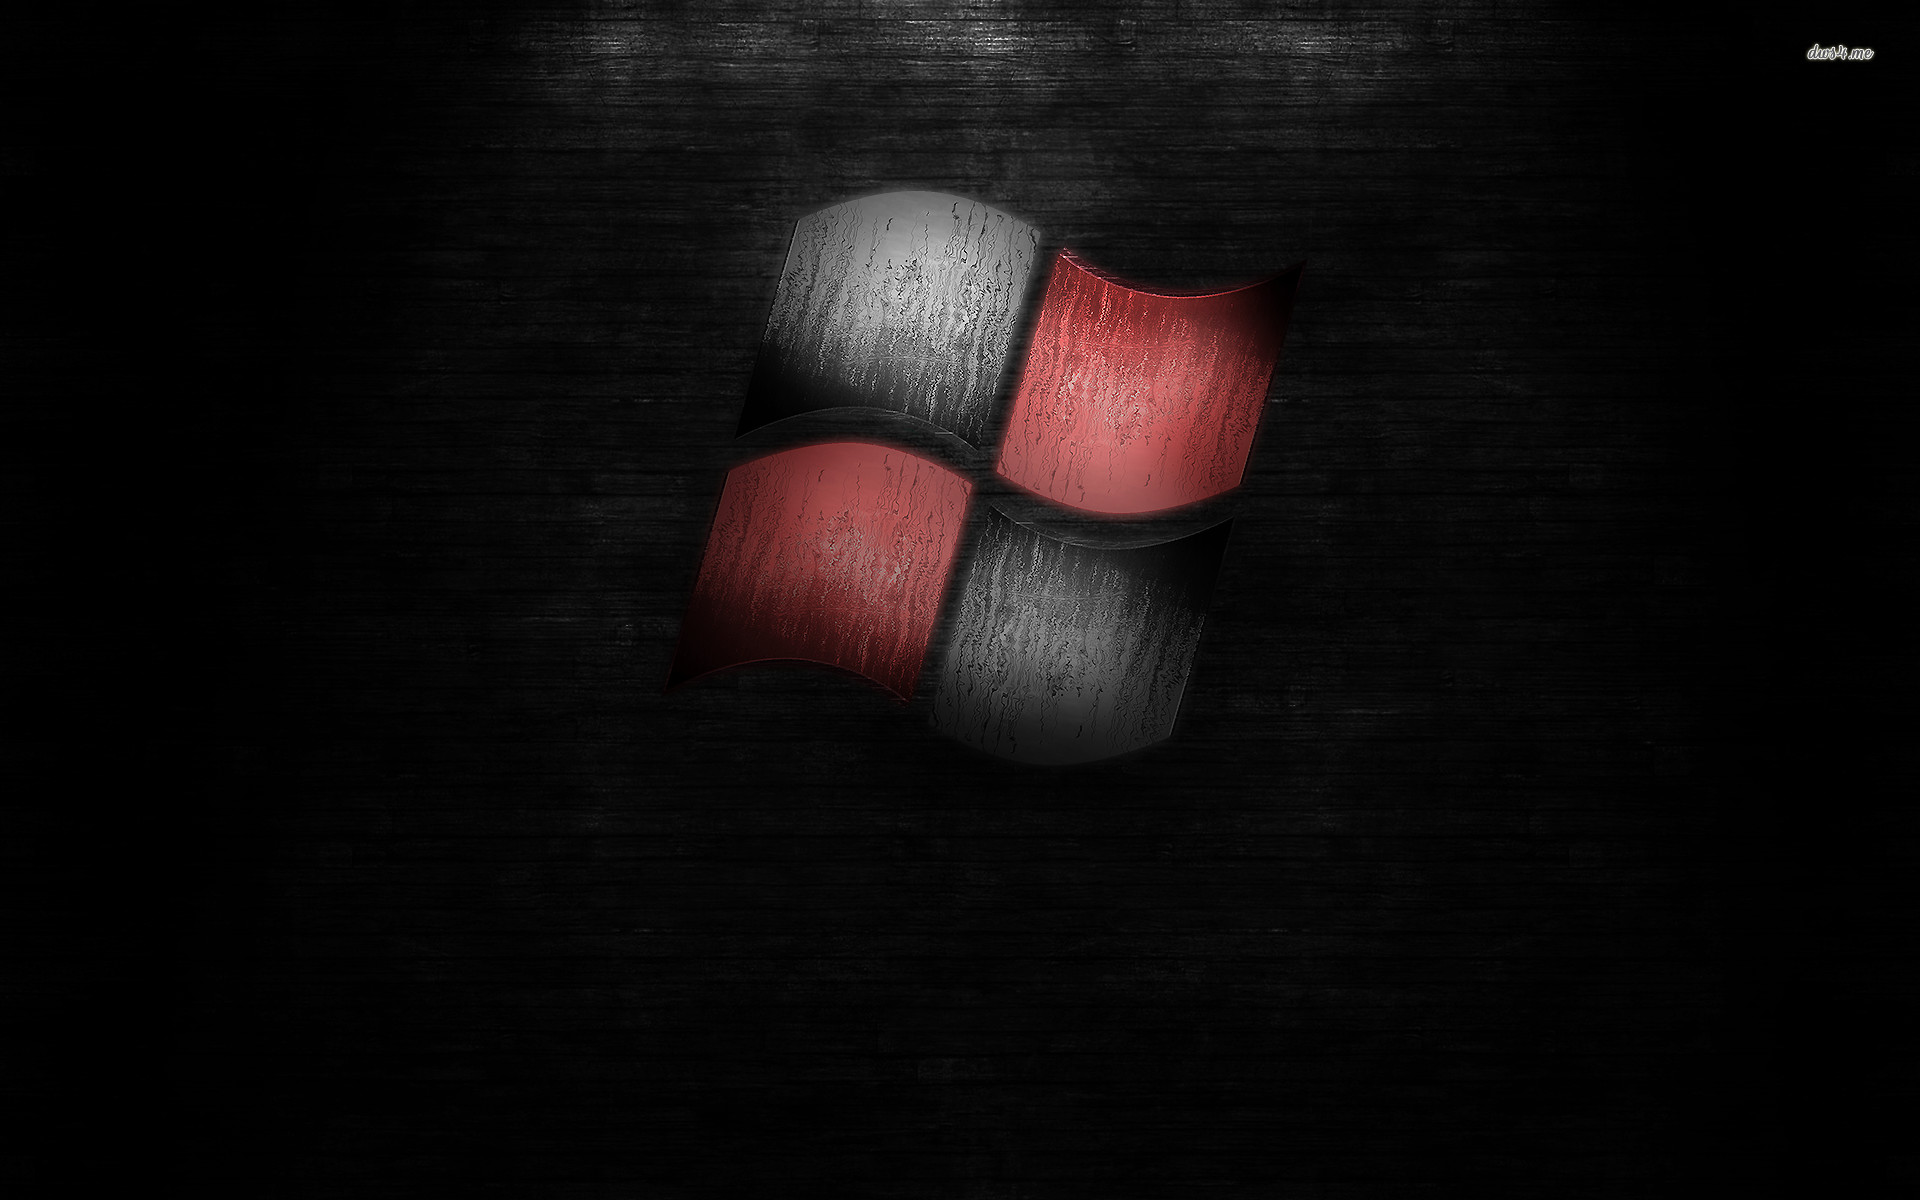 1920x1200 Black and red Windows logo wallpaper - Computer wallpapers - #20441